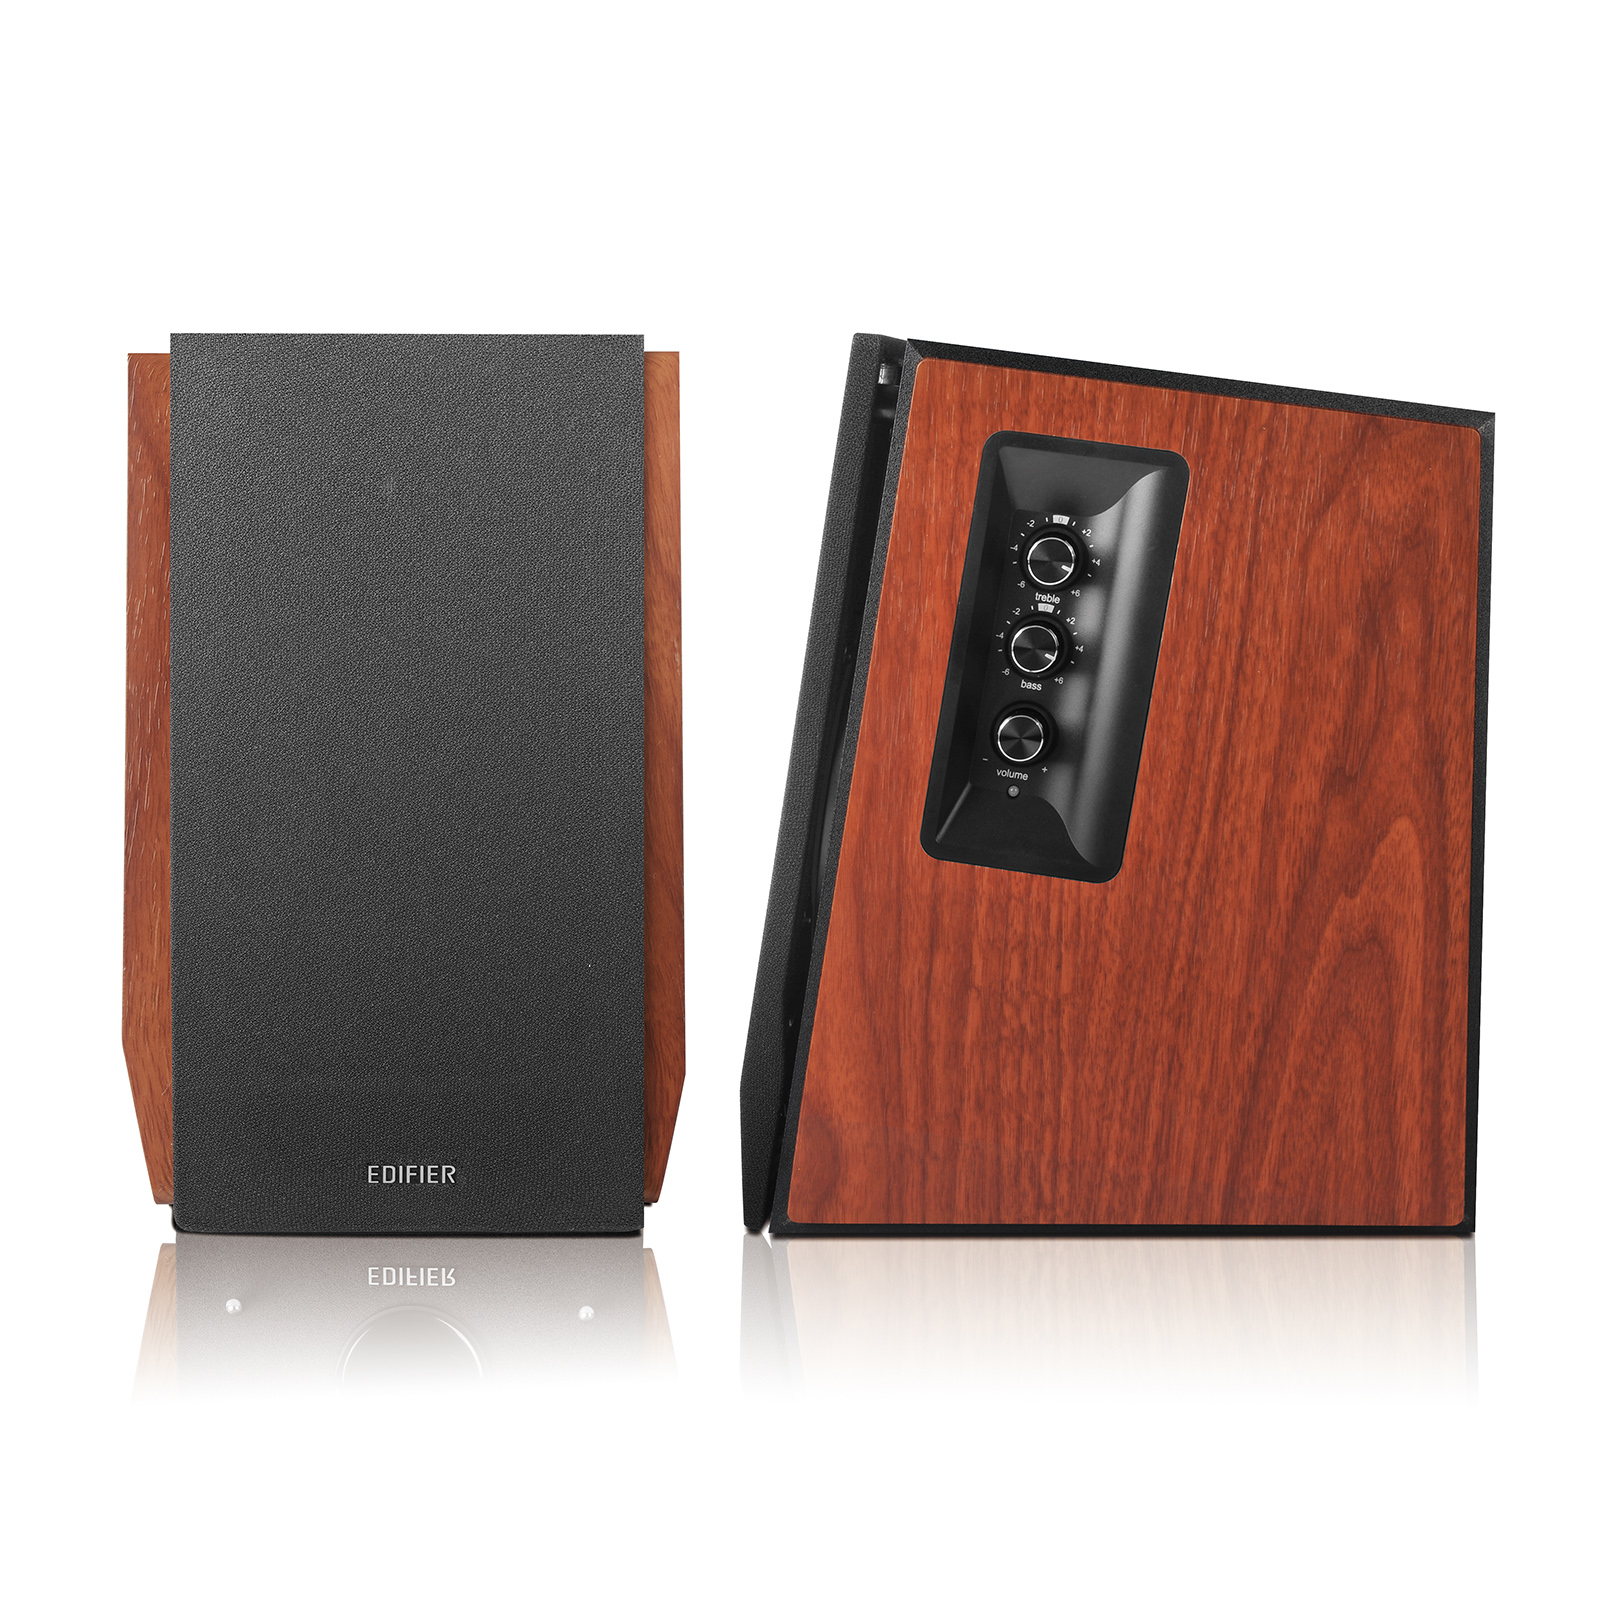 Edifier R1700BTs Active Bookshelf Speakers - Bluetooth v5.0, 2.0 Wireless Near Field Studio Monitor Speaker - 66w RMS with Subwoofer Line Out - Wooden Enclosure - image 5 of 7